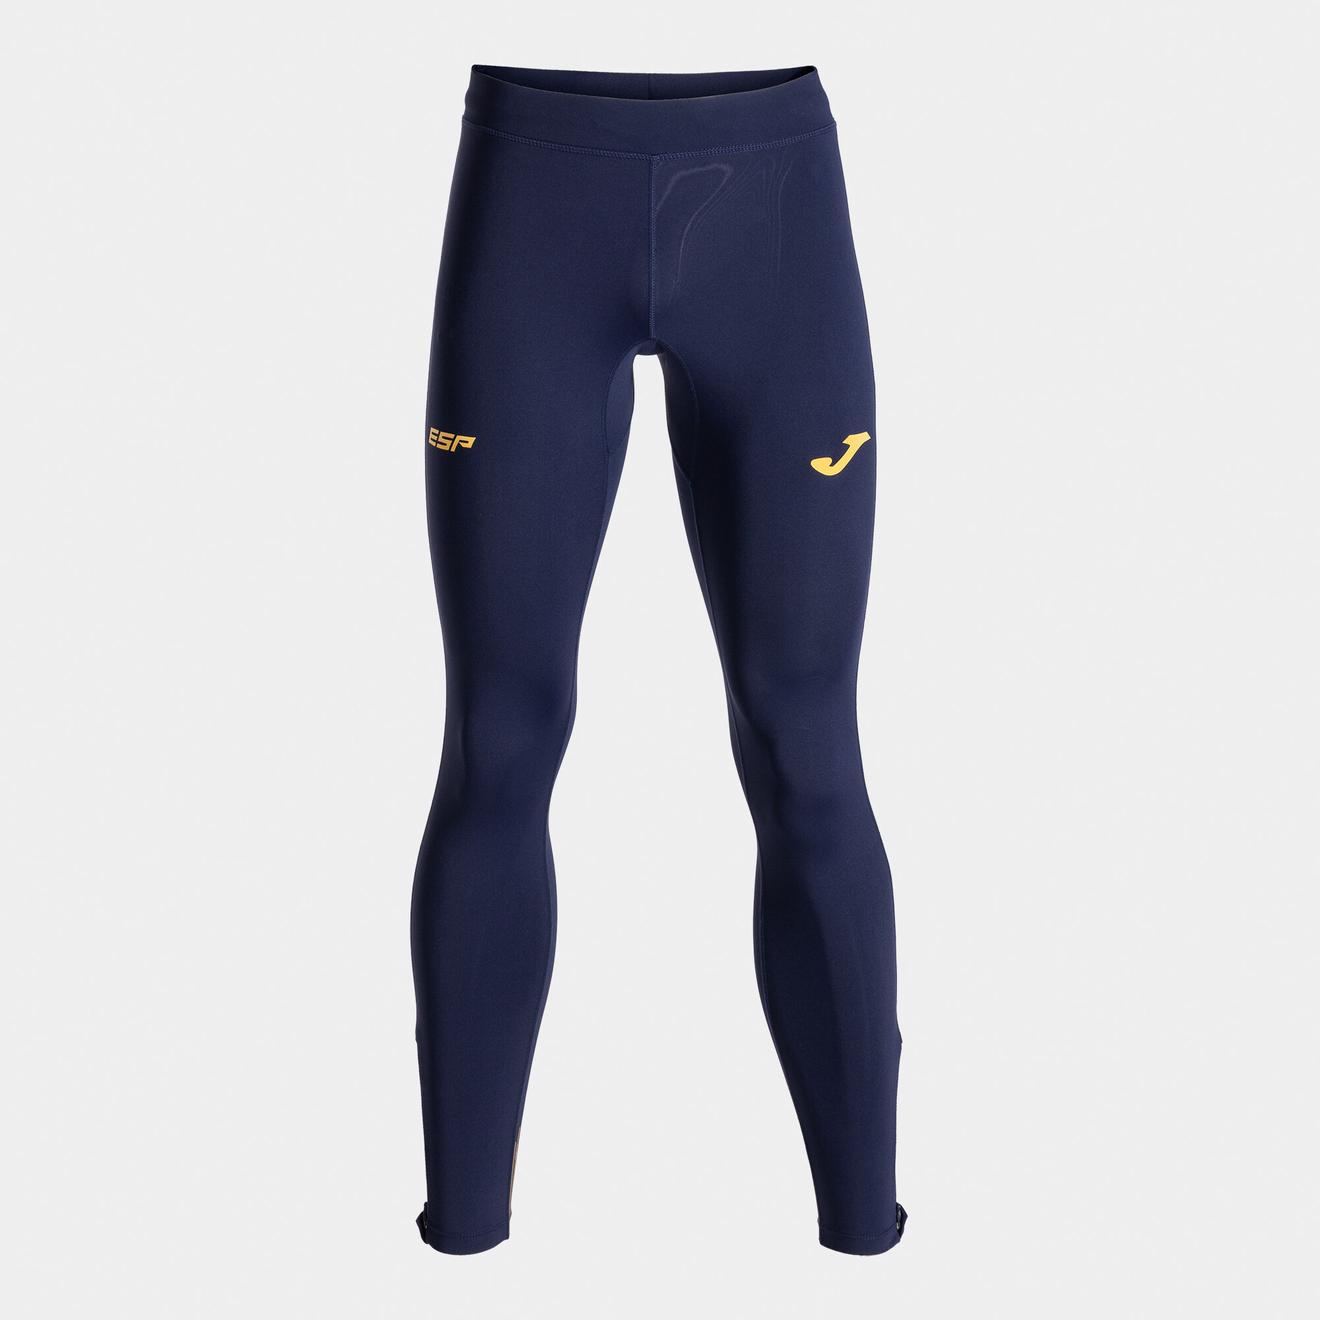 Long tights home kit Royal Spanish Athletics Federation offers at £58 in Joma